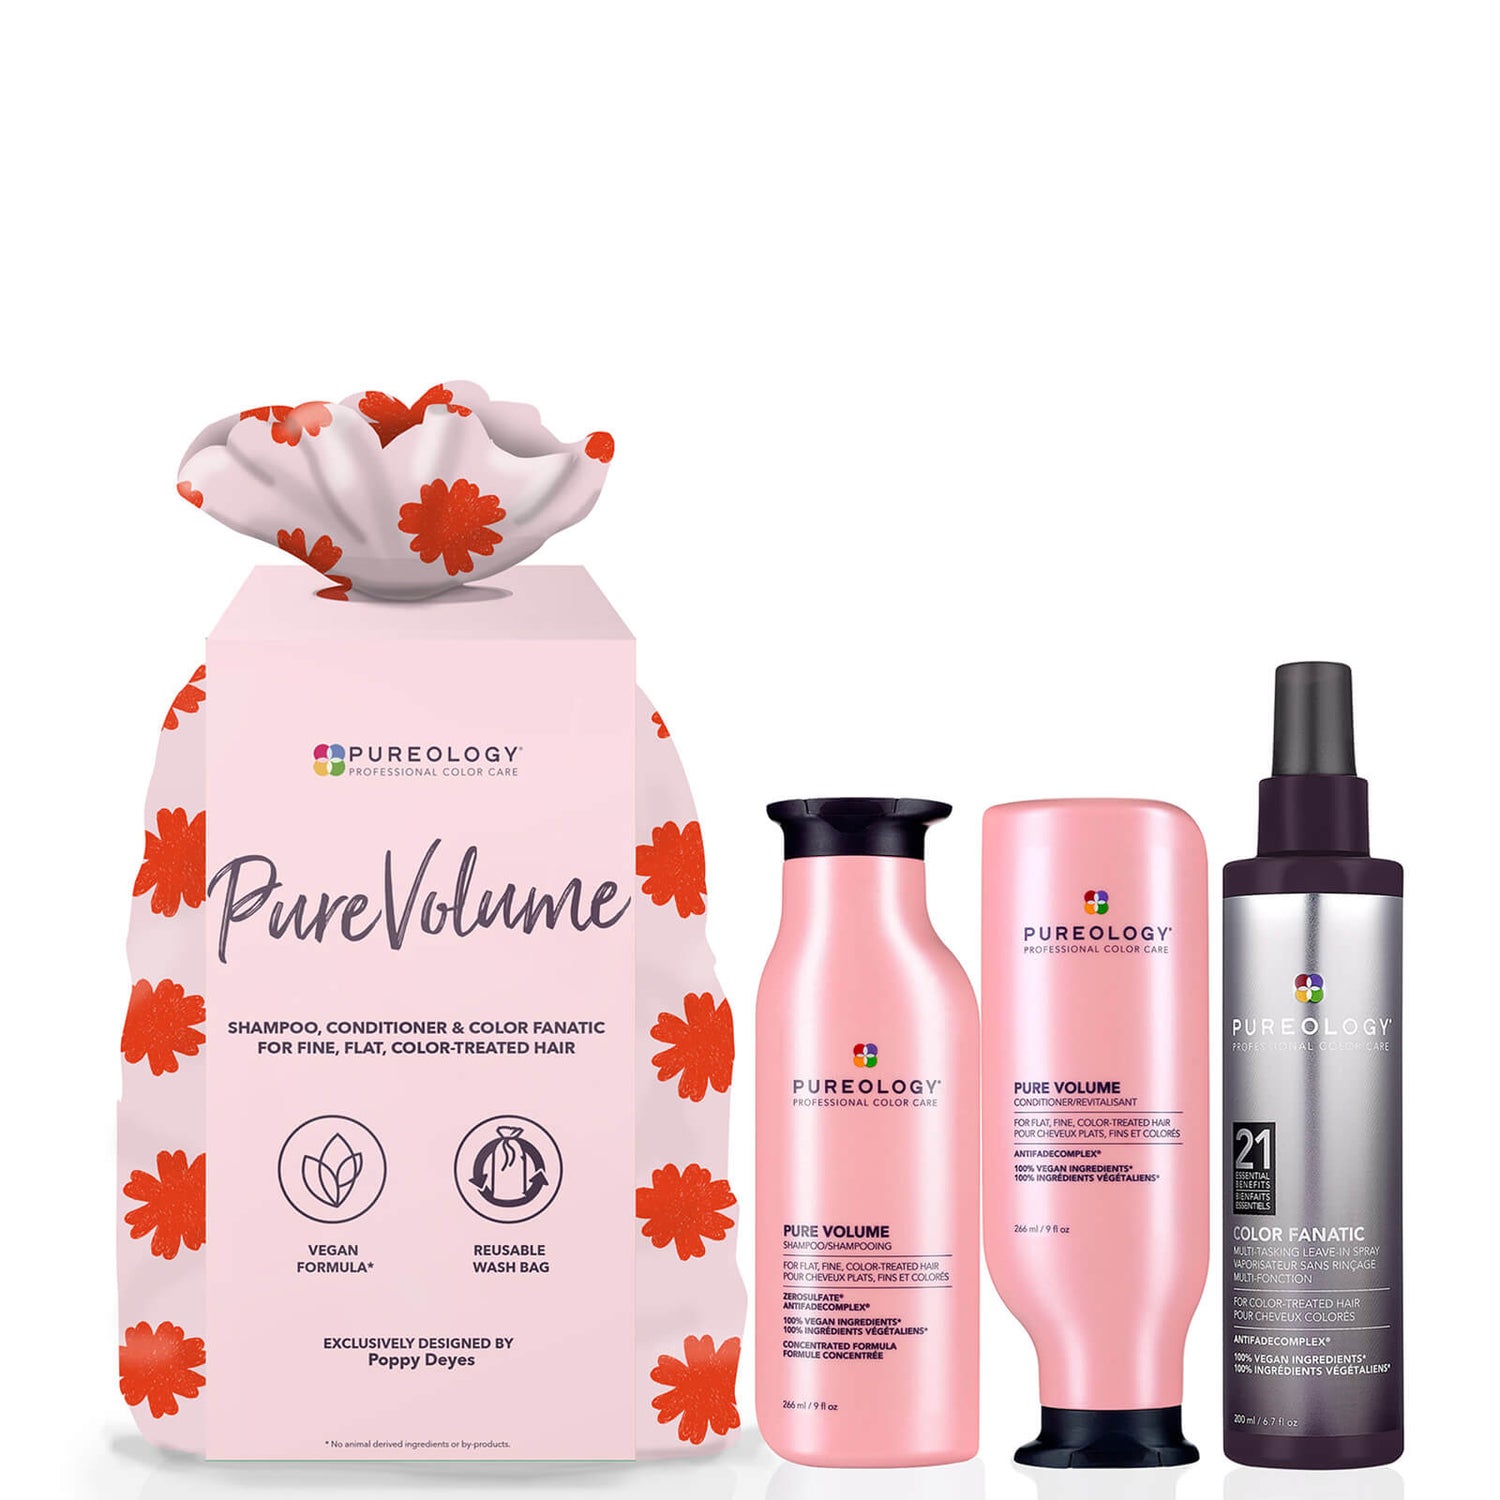 Pureology Pure Volume and Color Fanatic Set (Worth £72.35)